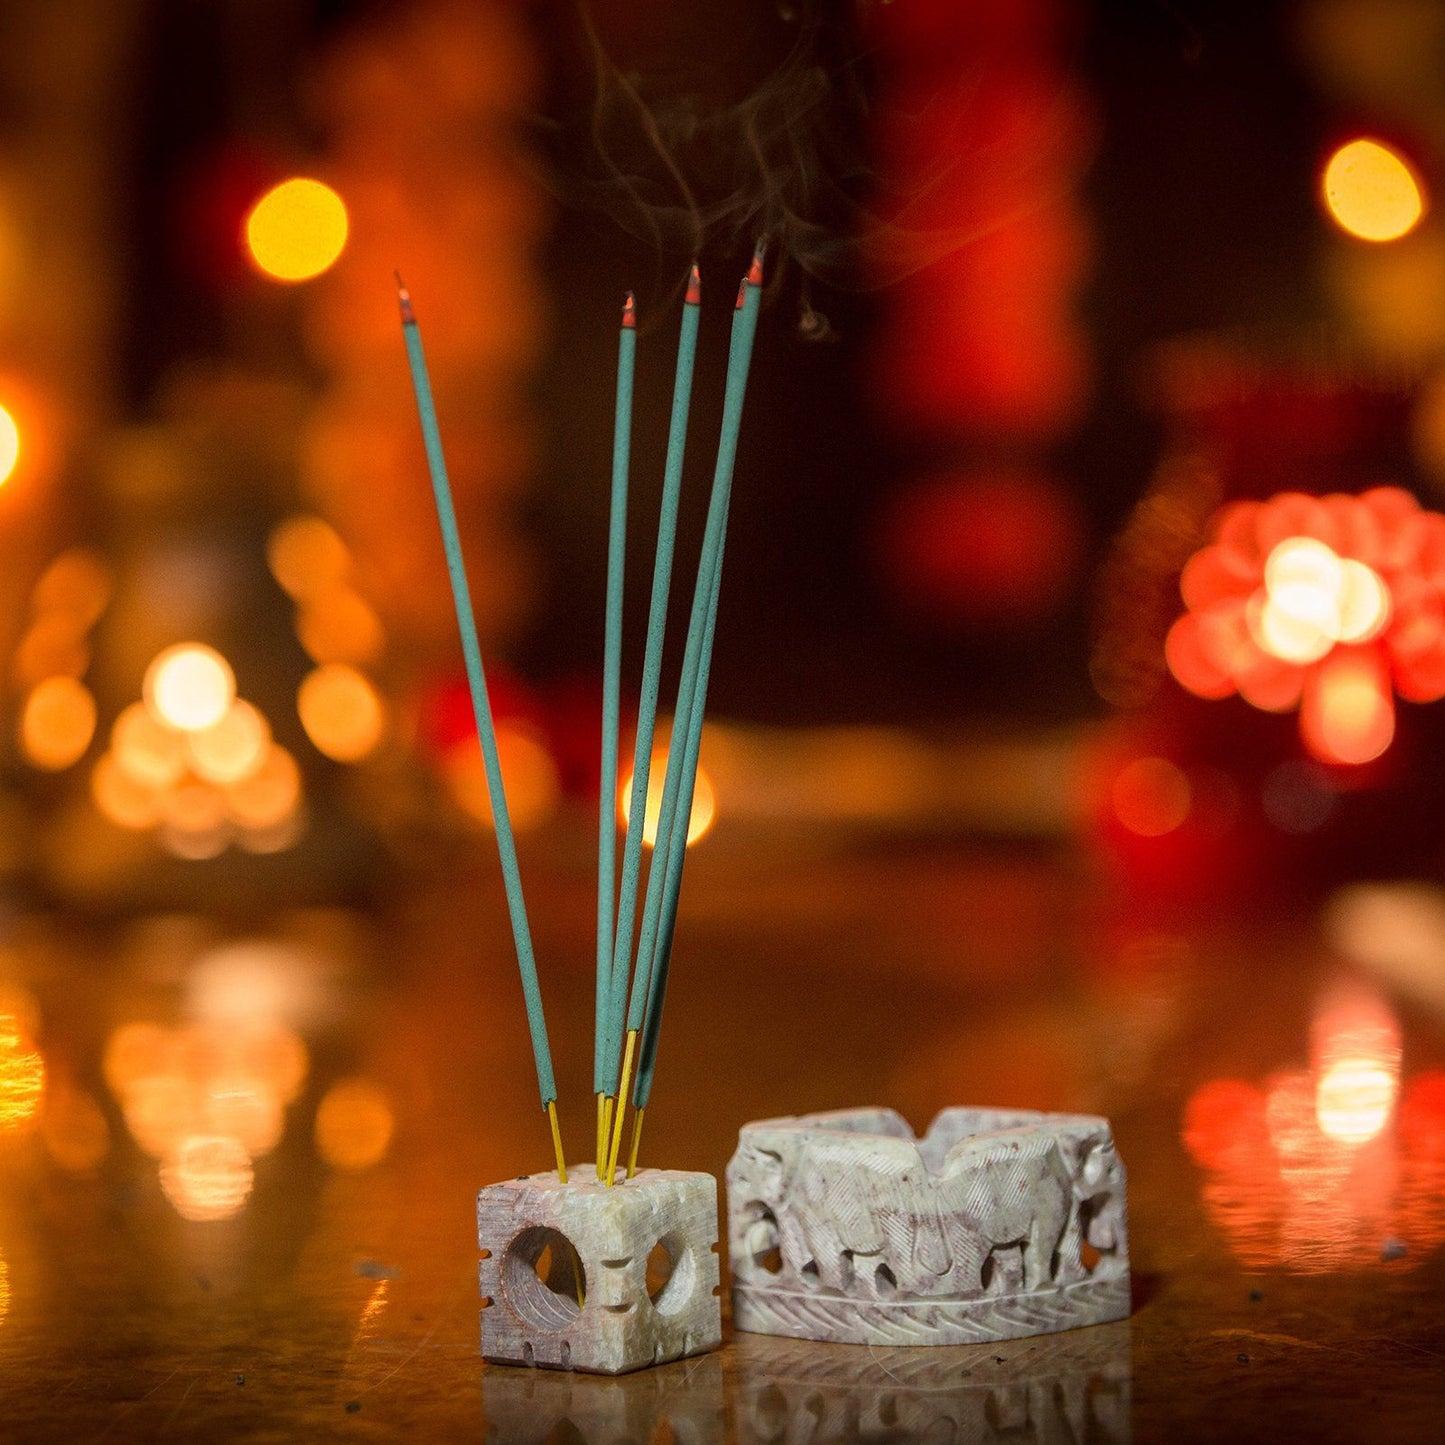 Marvellous Multipurpose Incense Stick Holder with Elephant Carving